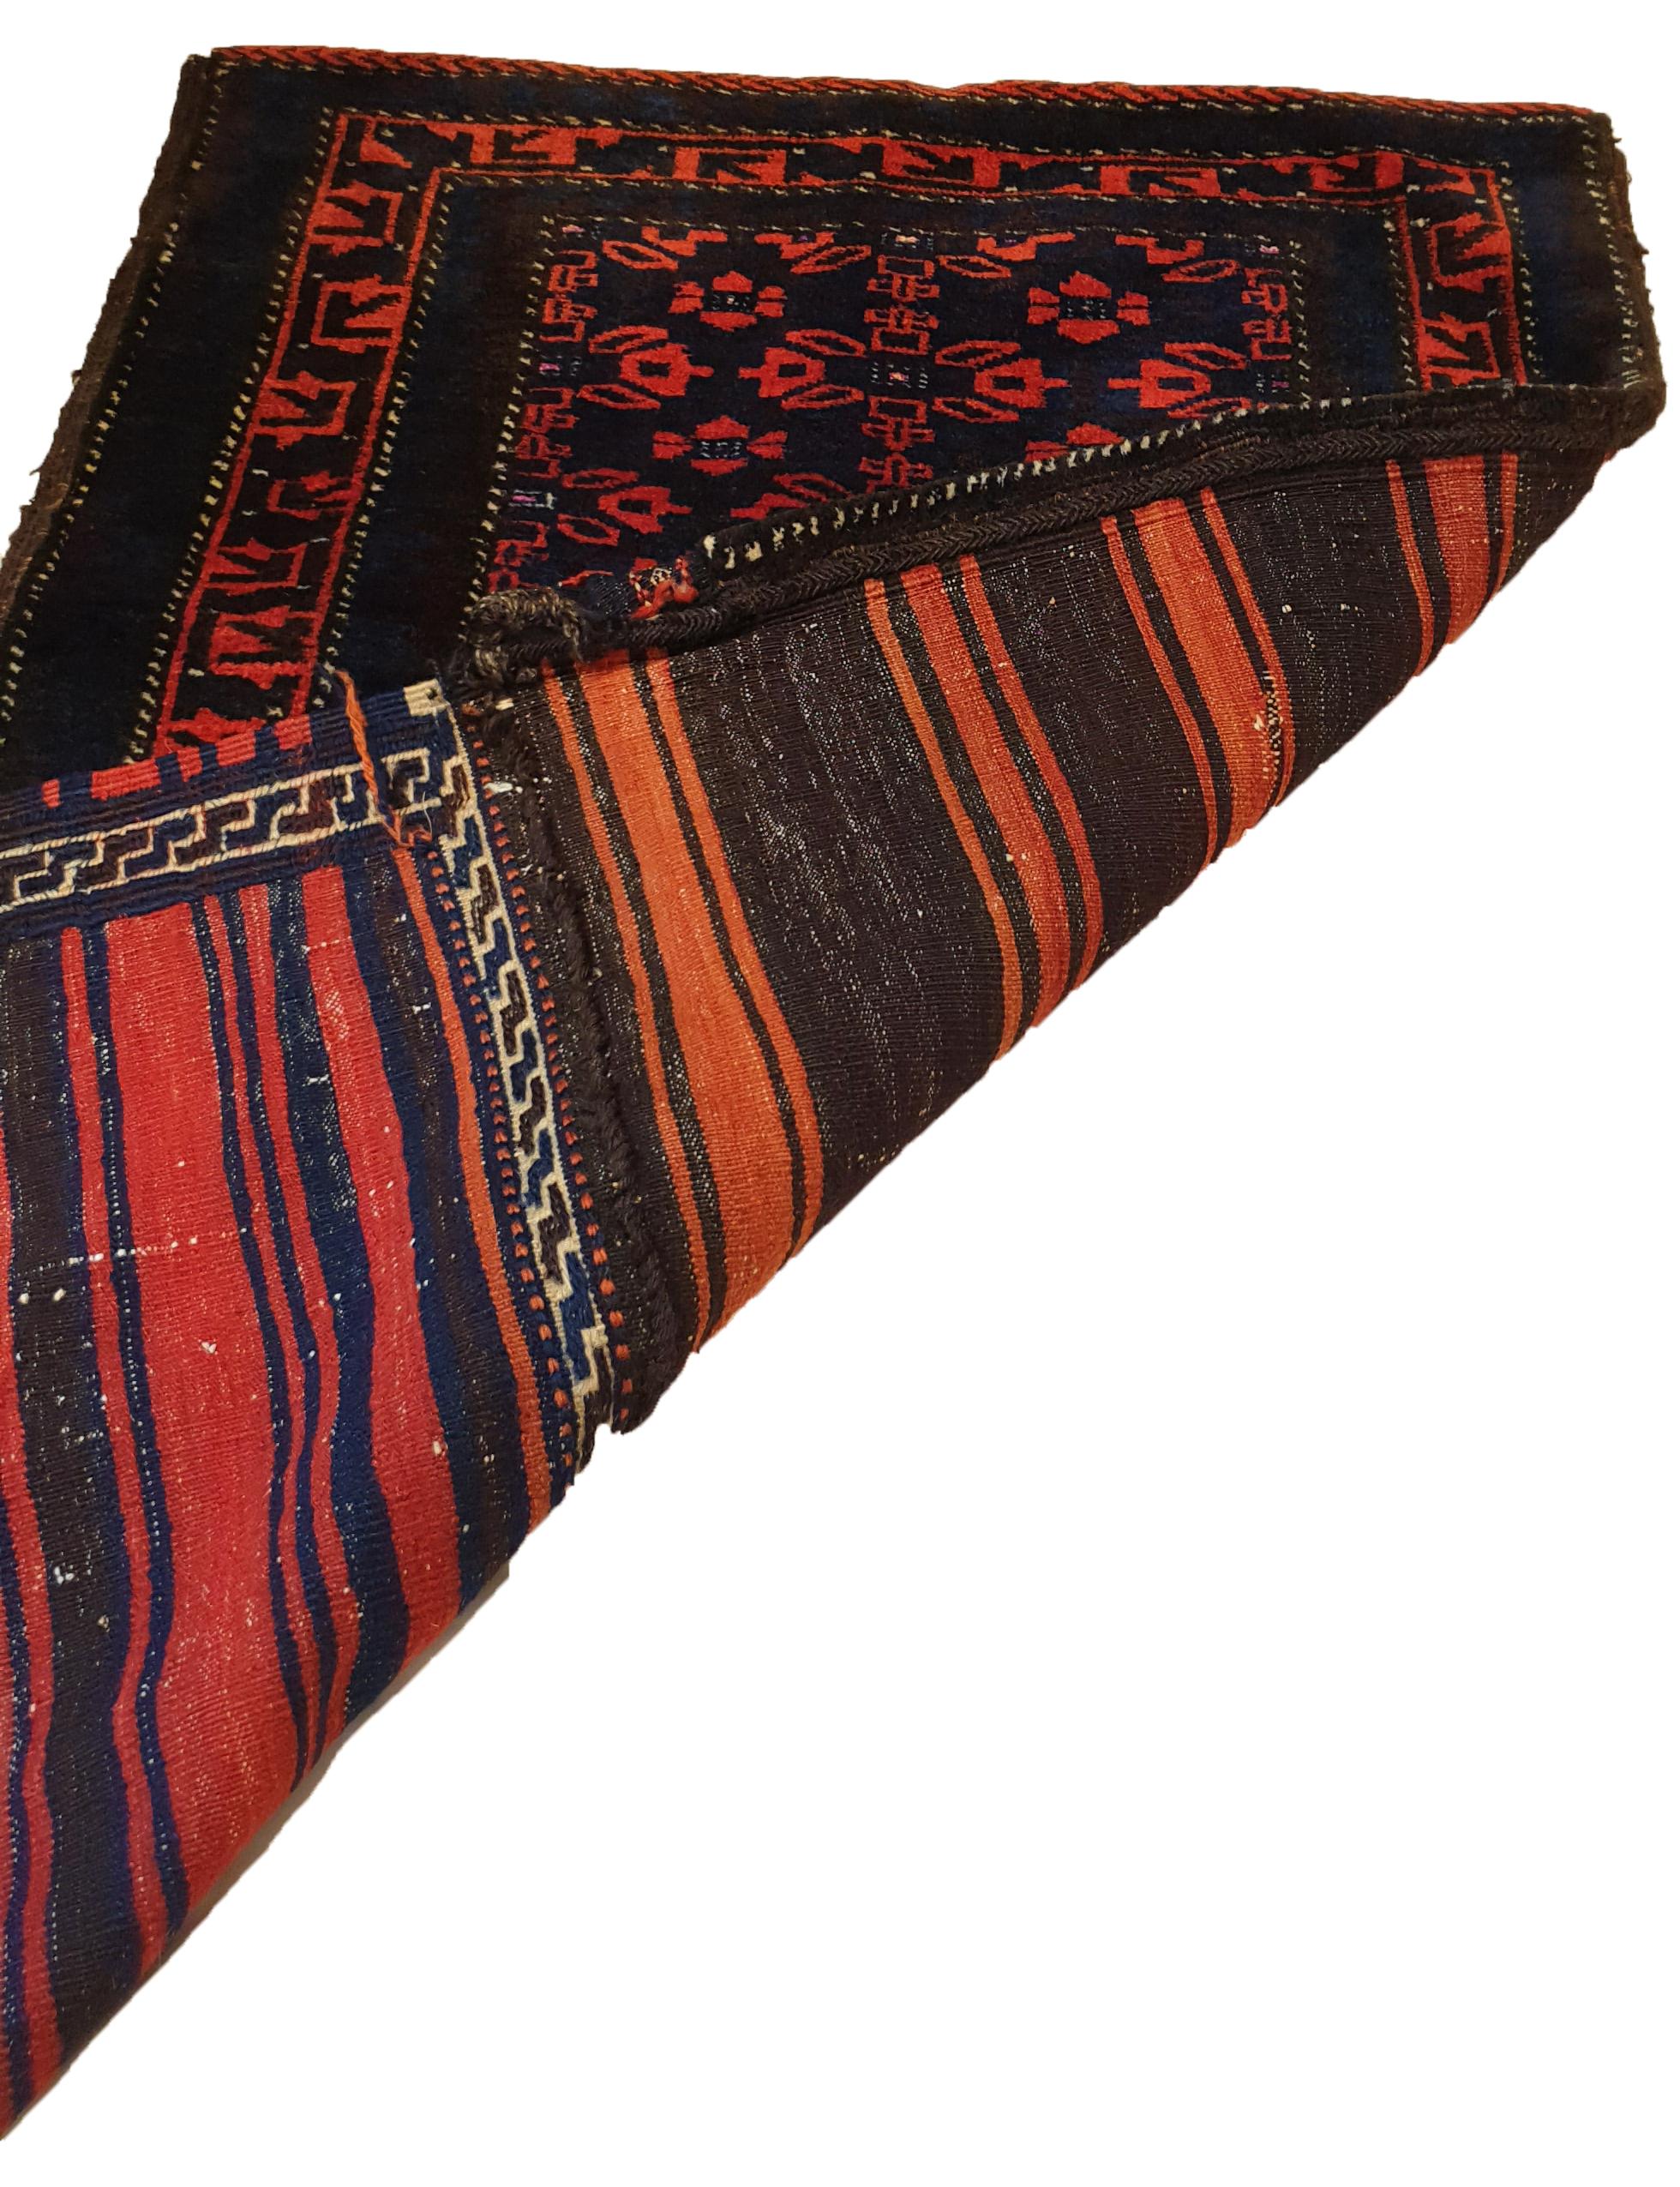 Tribal 654 - Pretty Little Bukhara Saddle Bag with a Beautiful Design and Colors For Sale